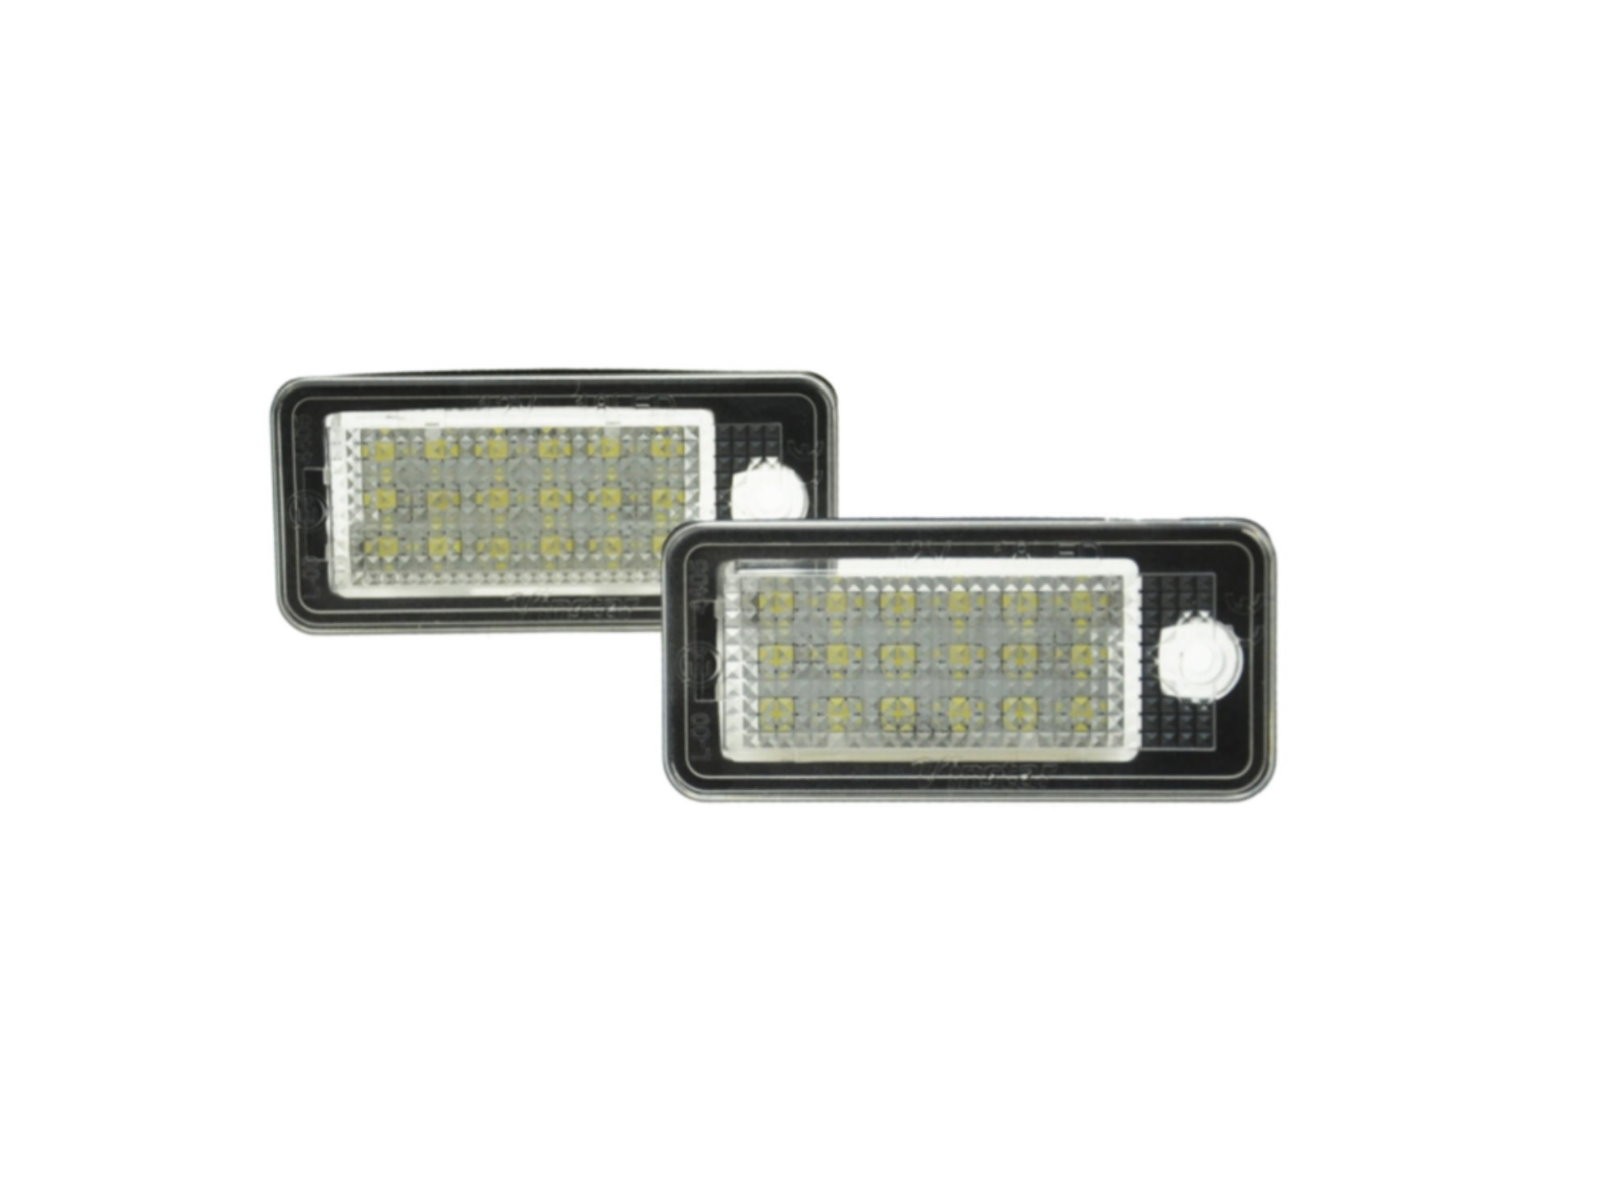 CrazyTheGod A4 A4/S4/RS4 B7 8E/8H 2006-2008 Sedan/Wagon/Convertible 2D/4D/5D LED W/ Canbus License Lamp White for AUDI